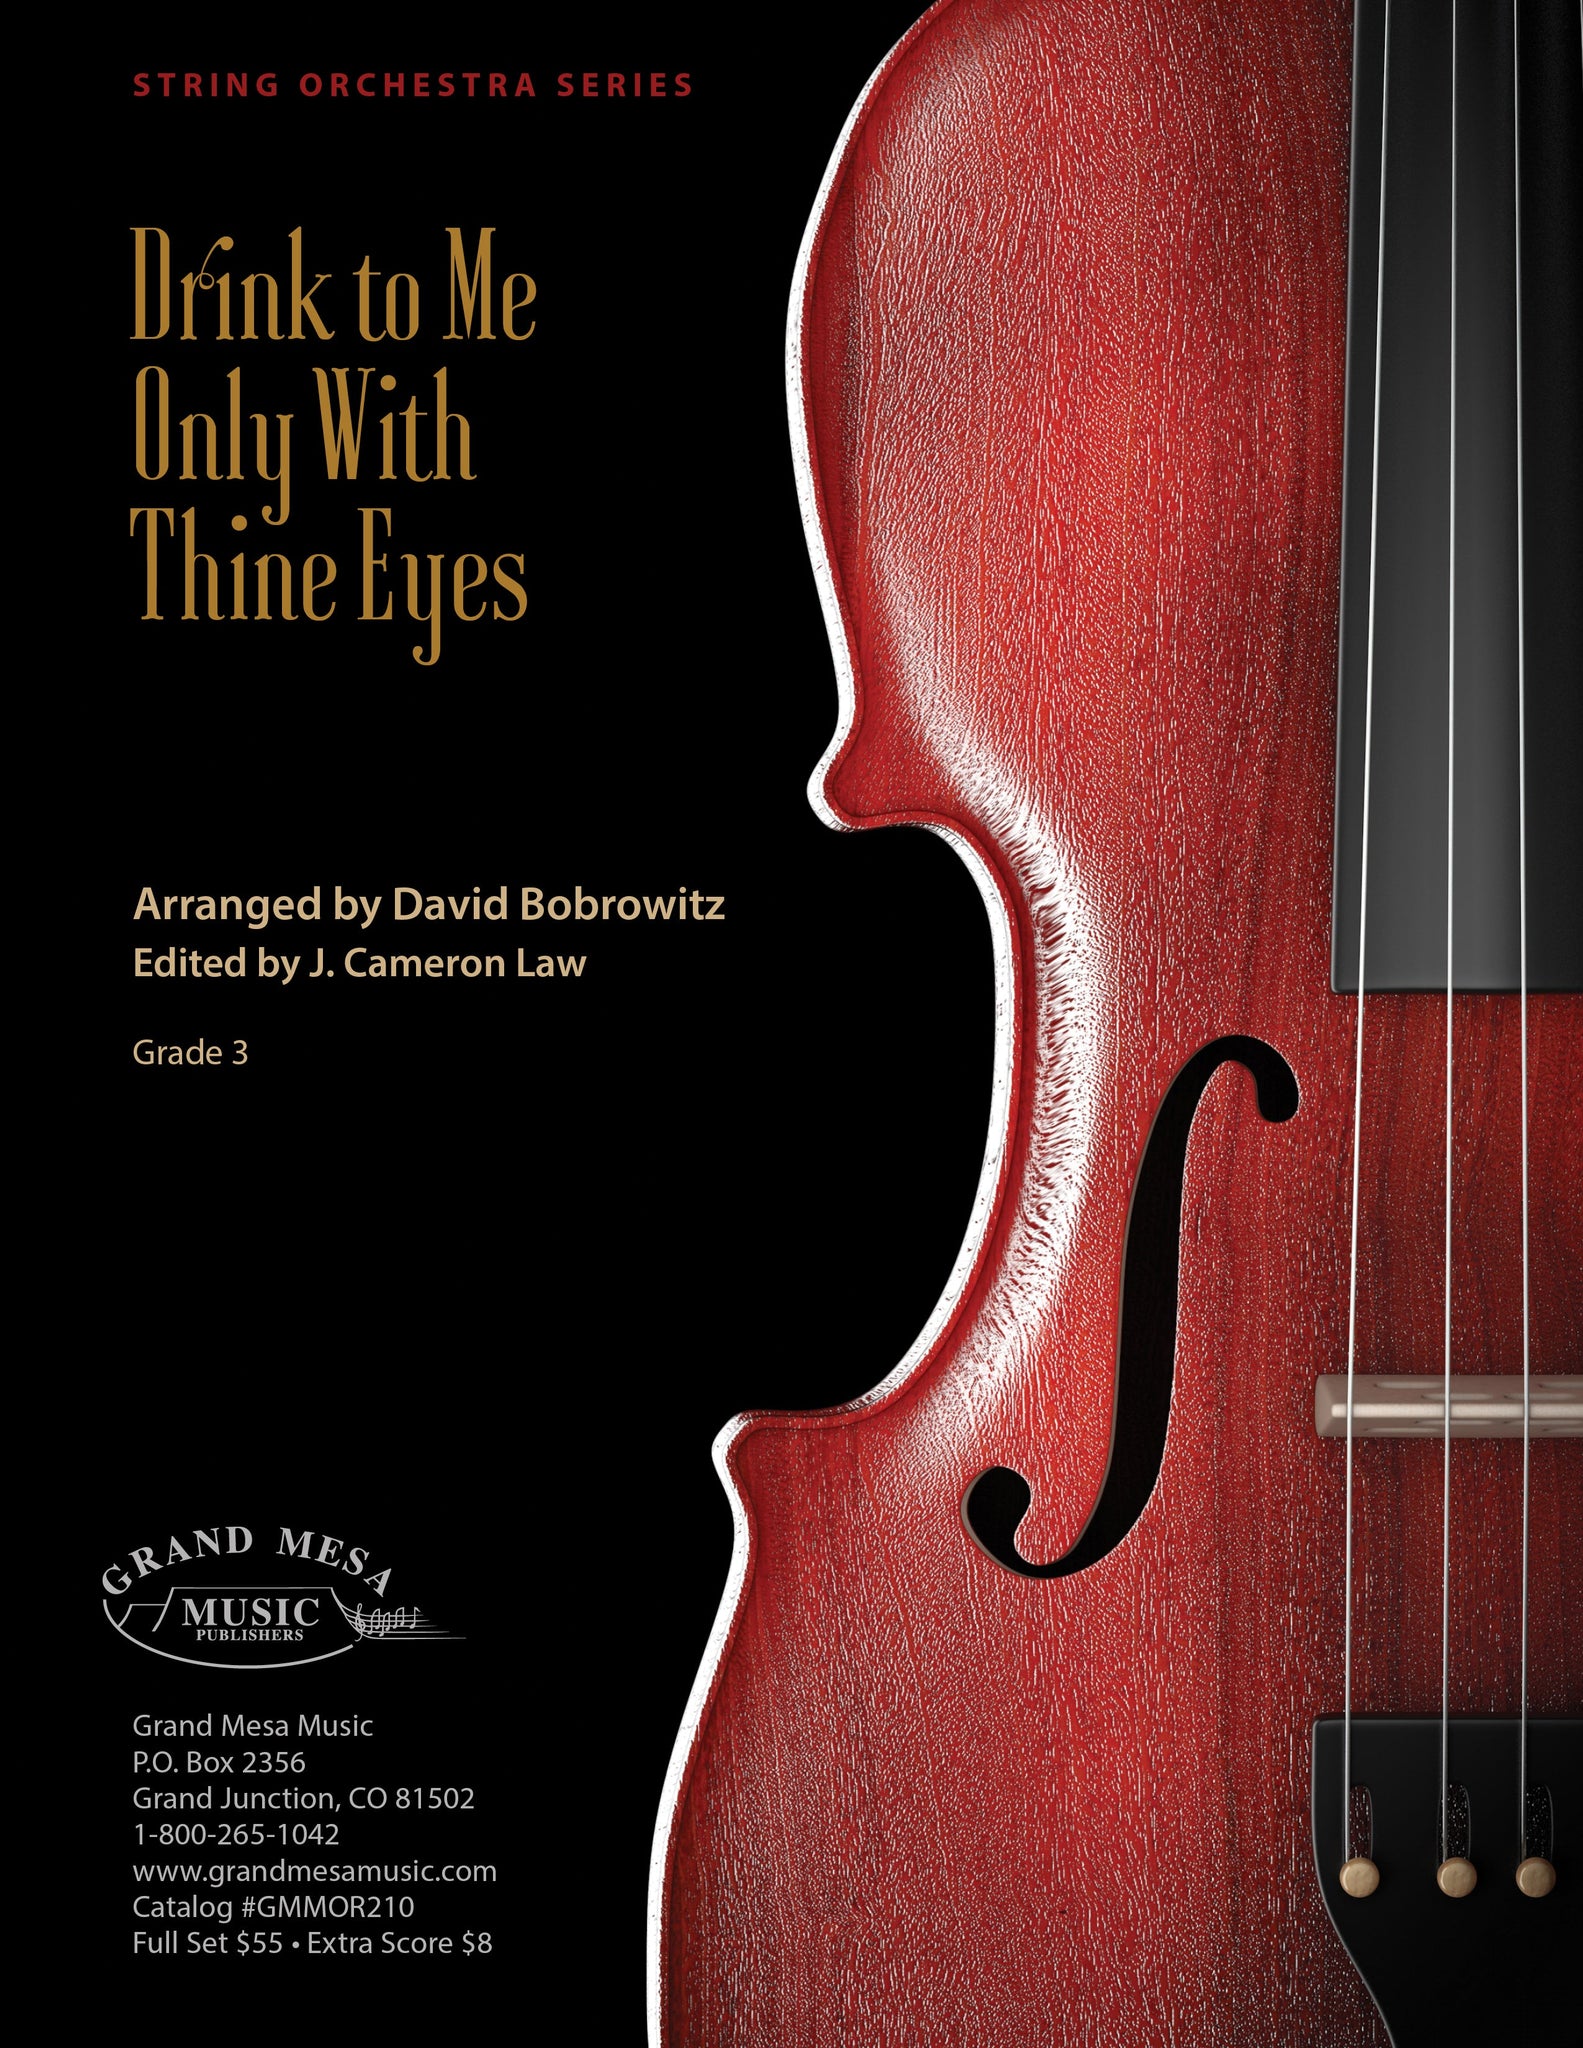 Strings sheet music cover of Drink to Me Only with Thine Eyes, arranged by David Bobrowitz.